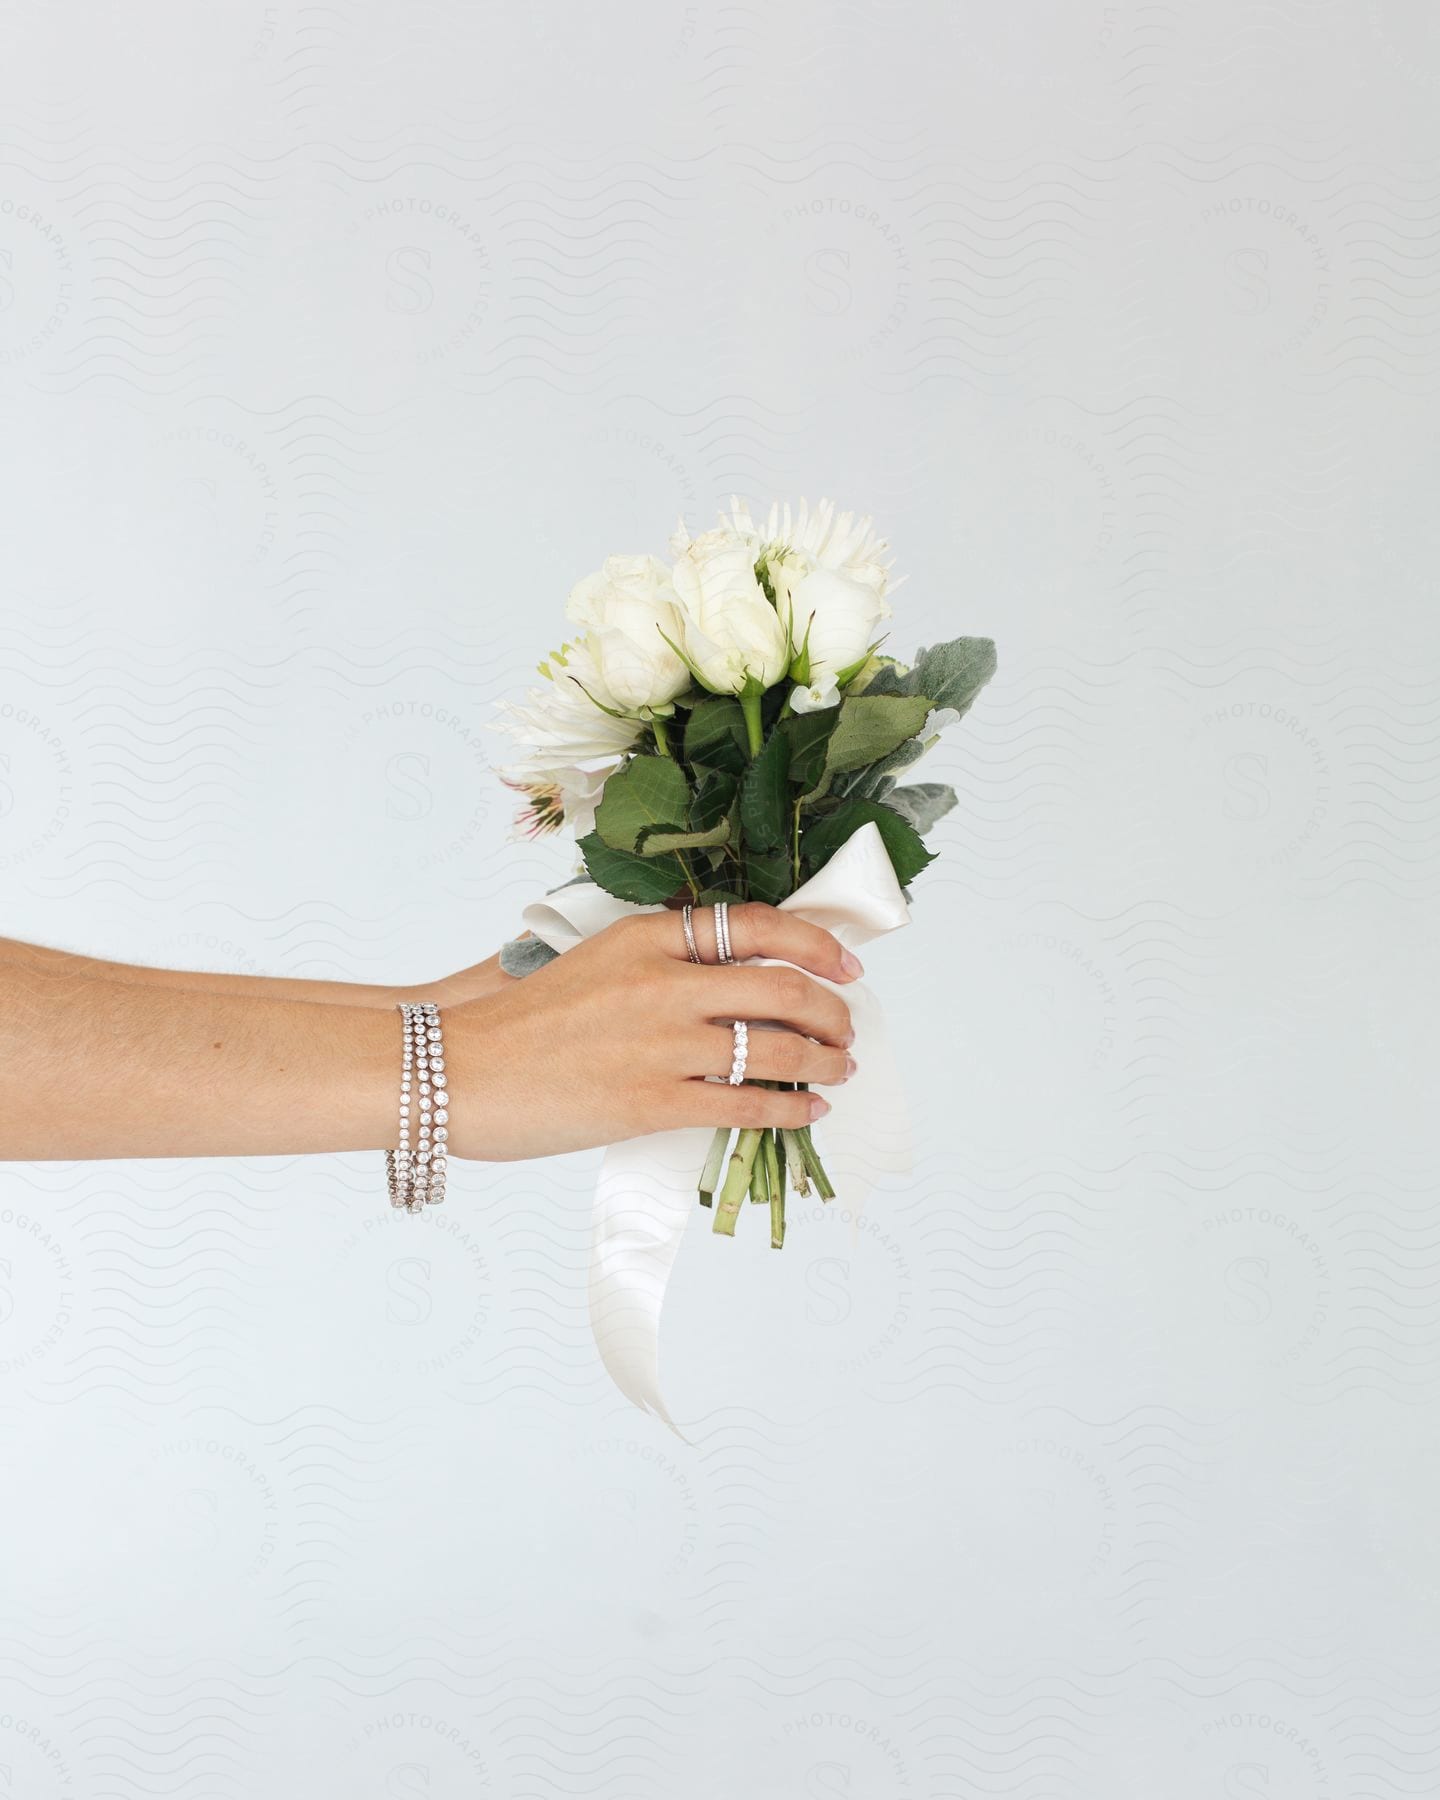 A wedding bouquet held by a woman's hands